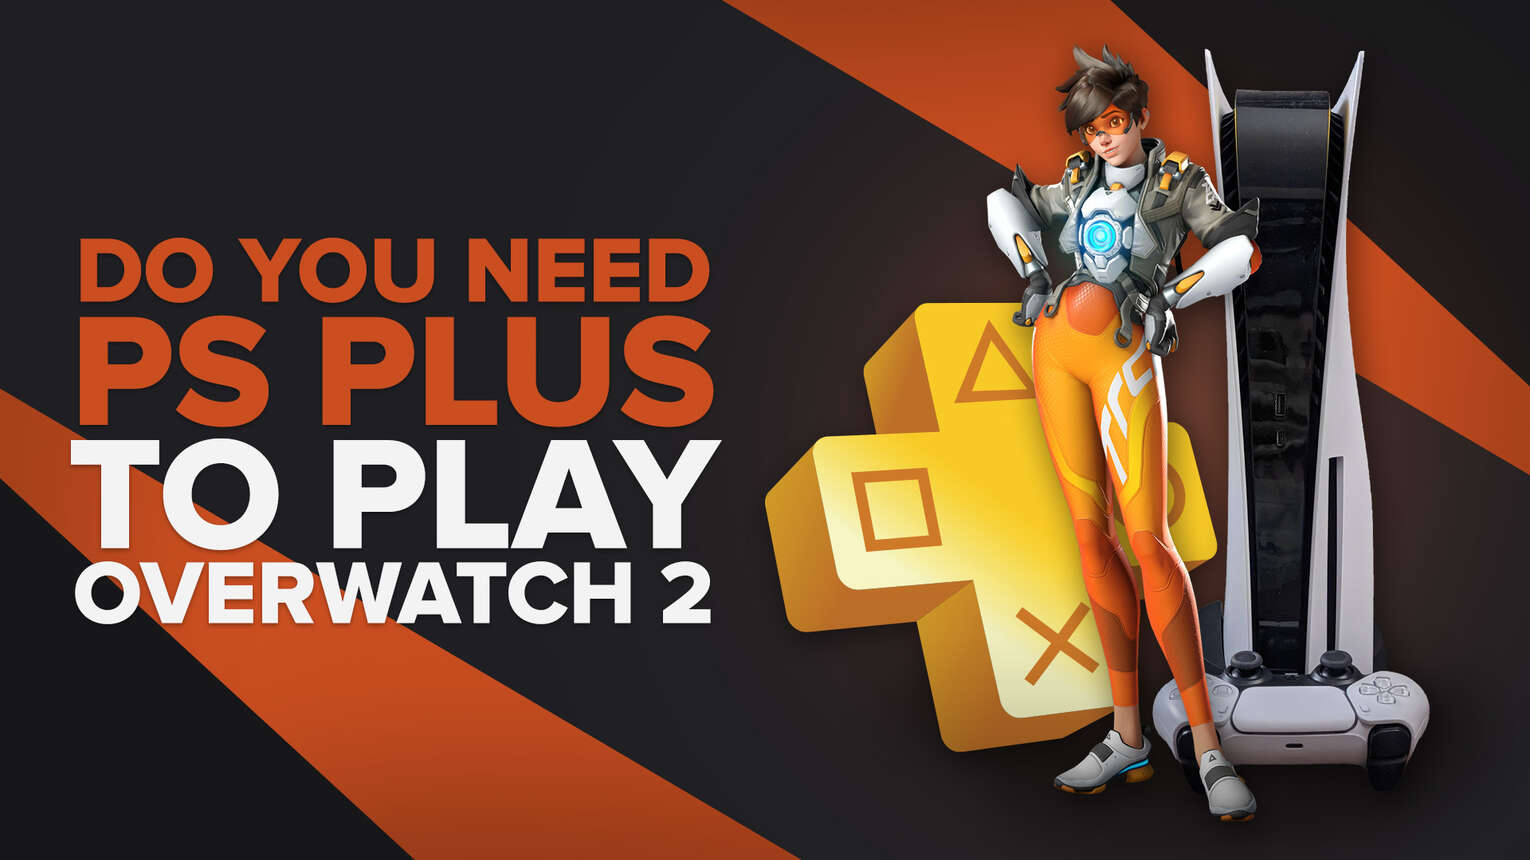 Do you need PS Plus to play Overwatch 2